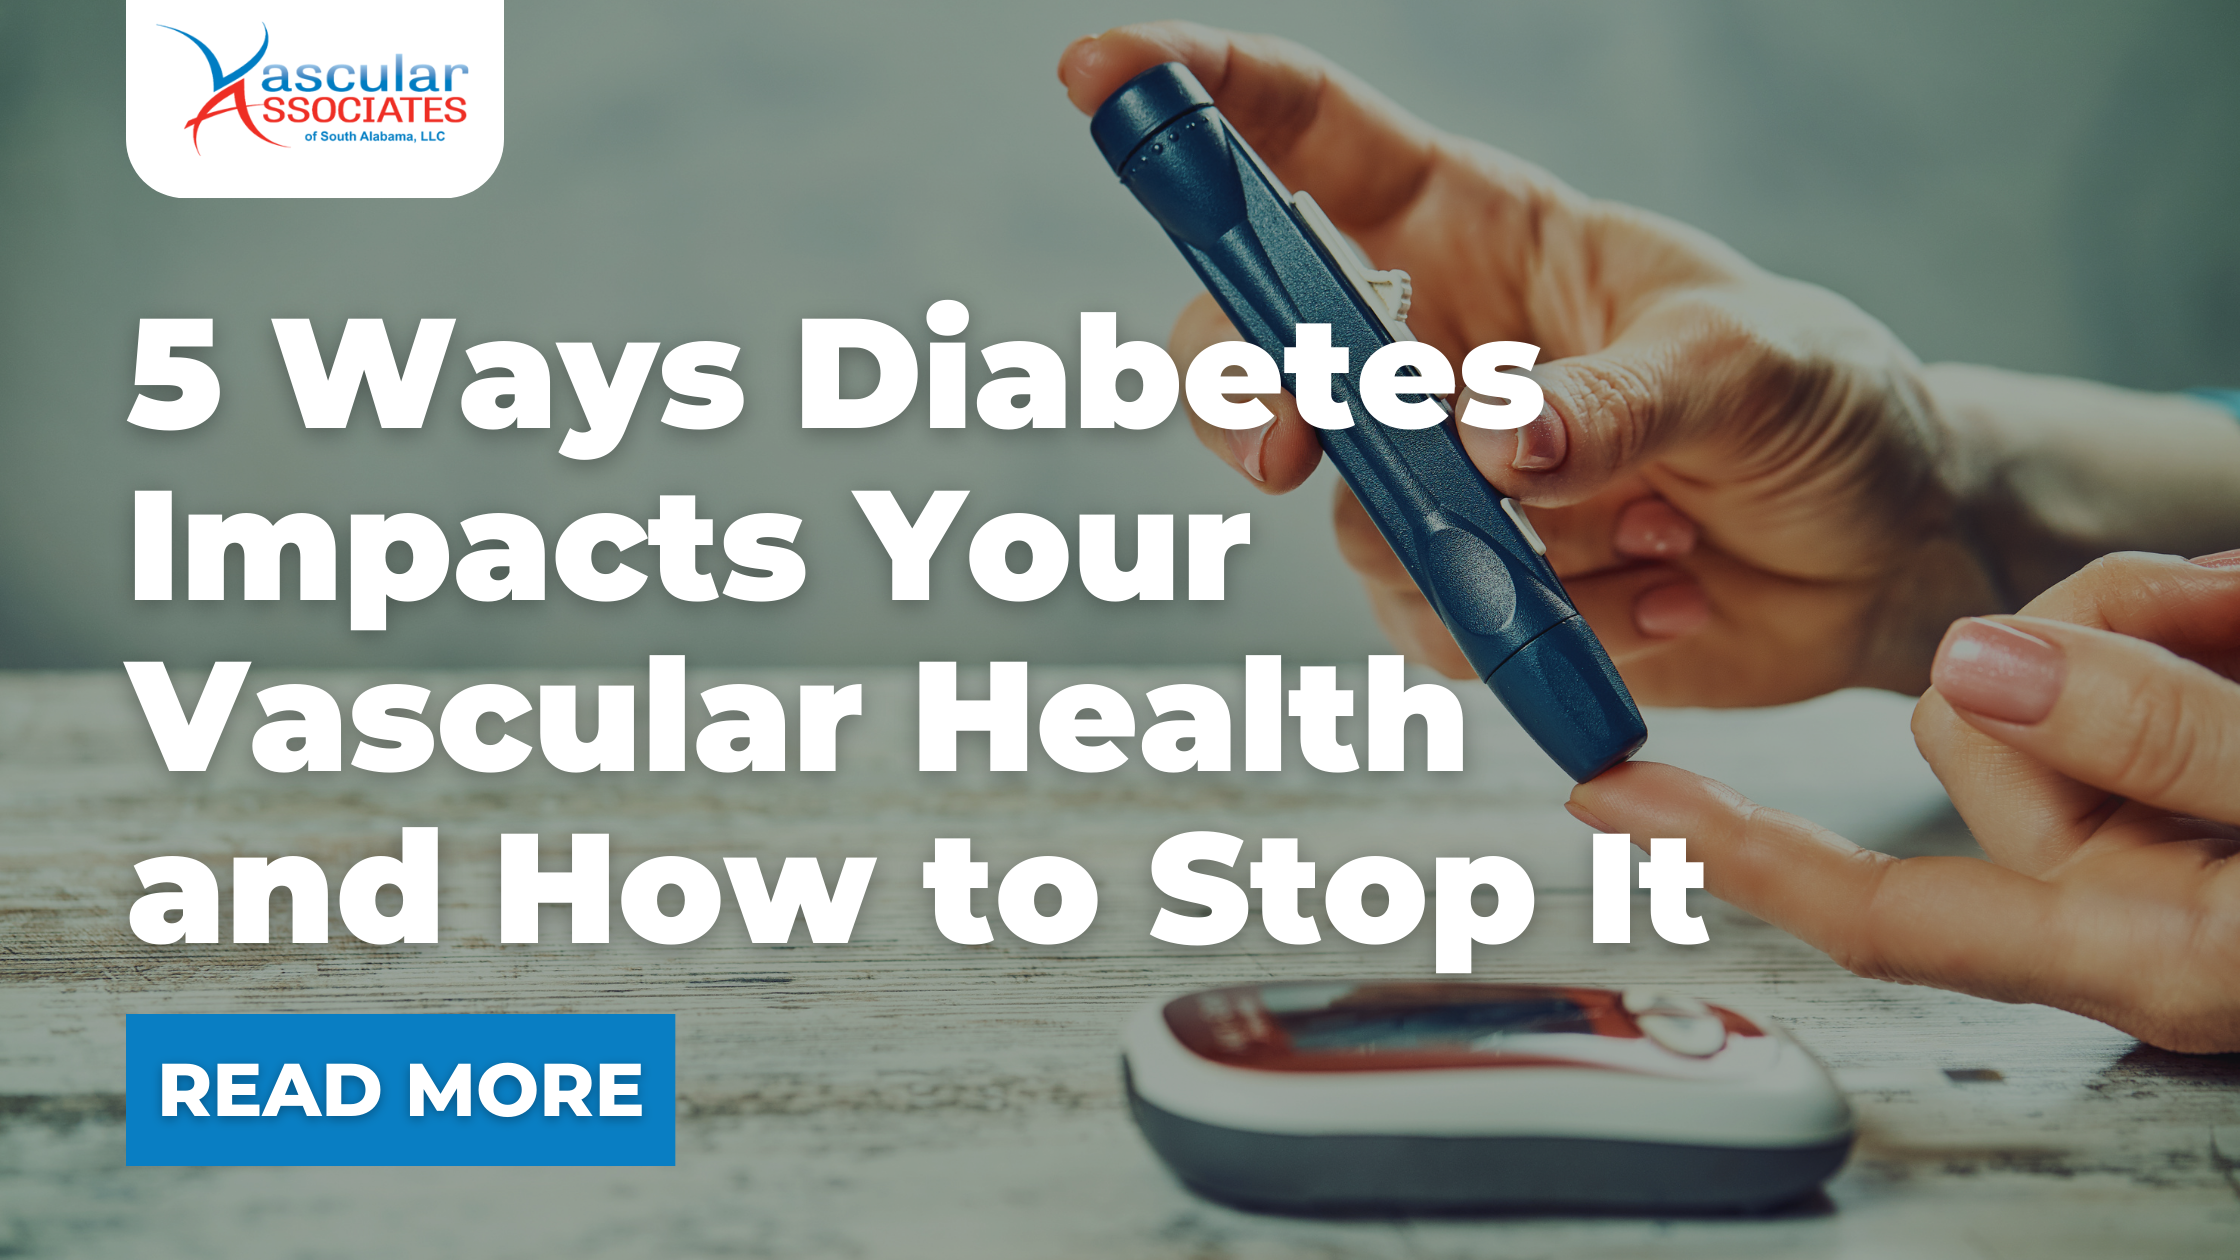 Vascular Blog - 5 Ways Diabetes Impacts Your Vascular Health and How to Stop It.png